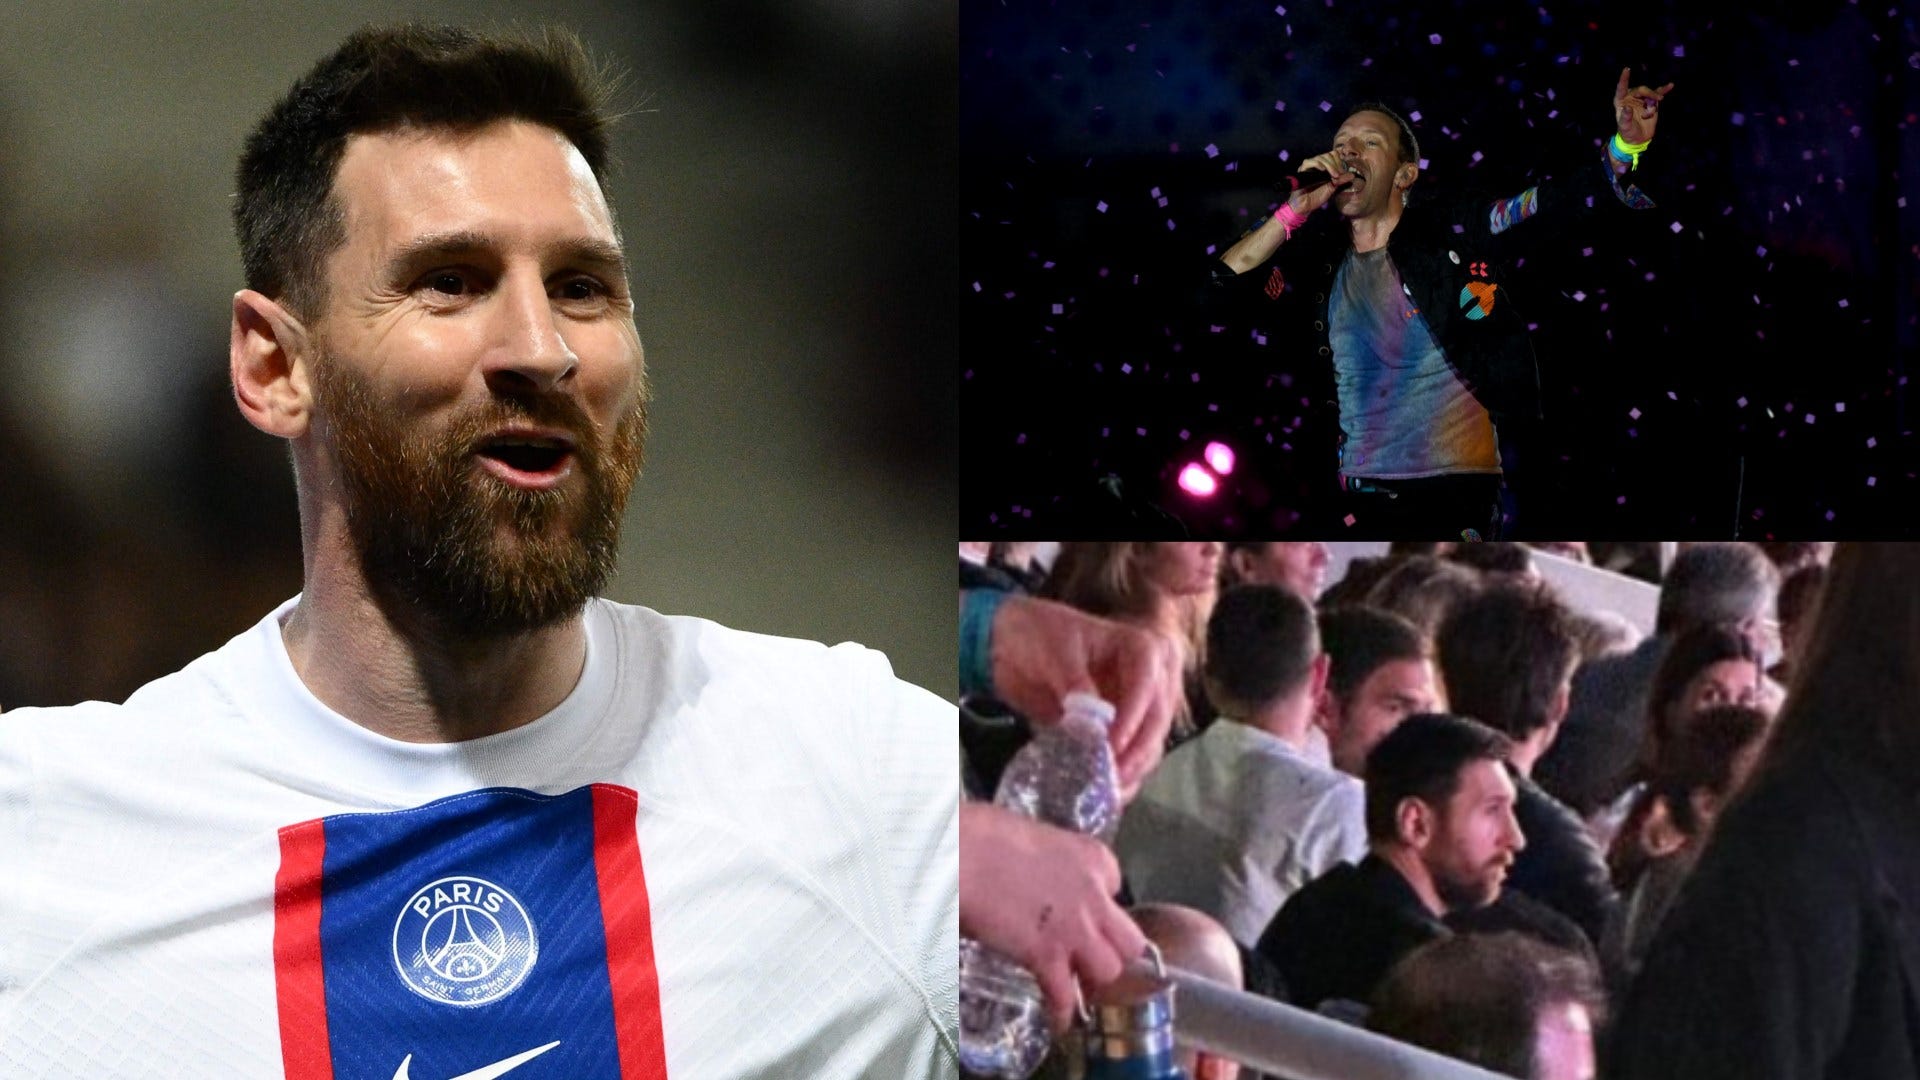 WATCH: Lionel Messi skips awards night with PSG to attend Coldplay concert in Barcelona amid mounting transfer talk